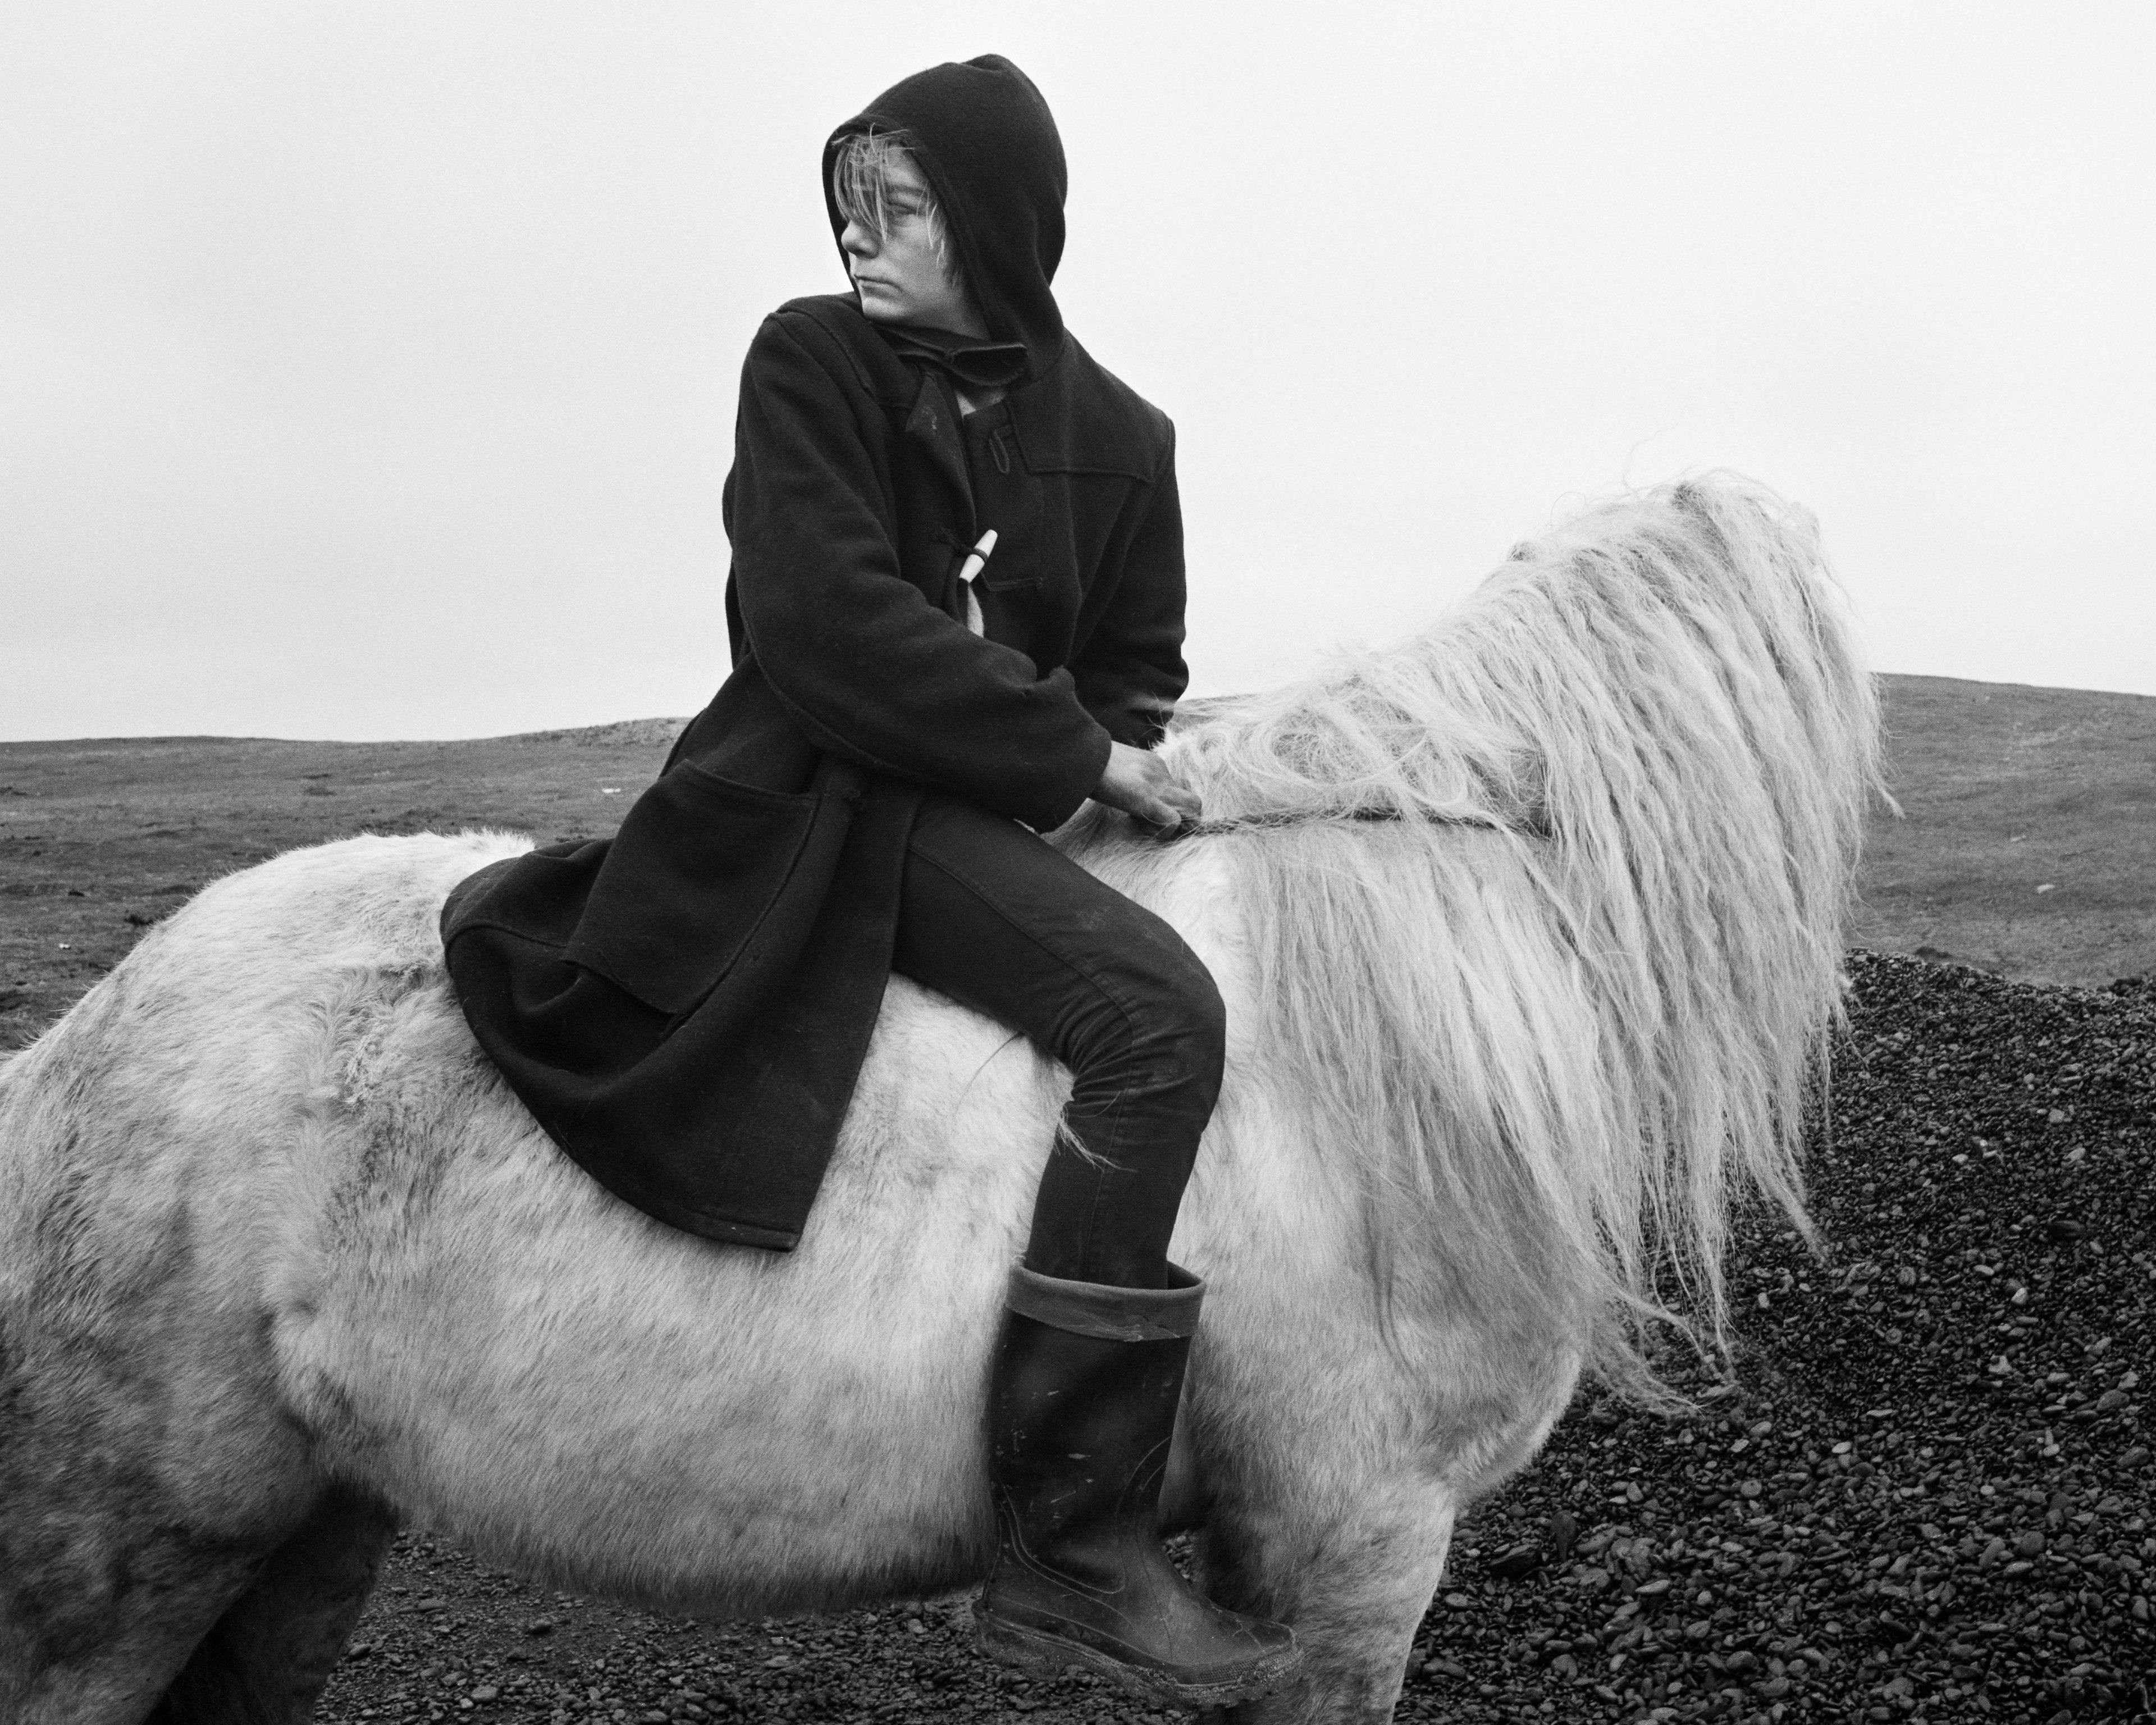 Boo on a horse. Lynemouth, Northumberland, England, Great Britain, 1984 © Chris Killip Photography Trust/Magnum Photos